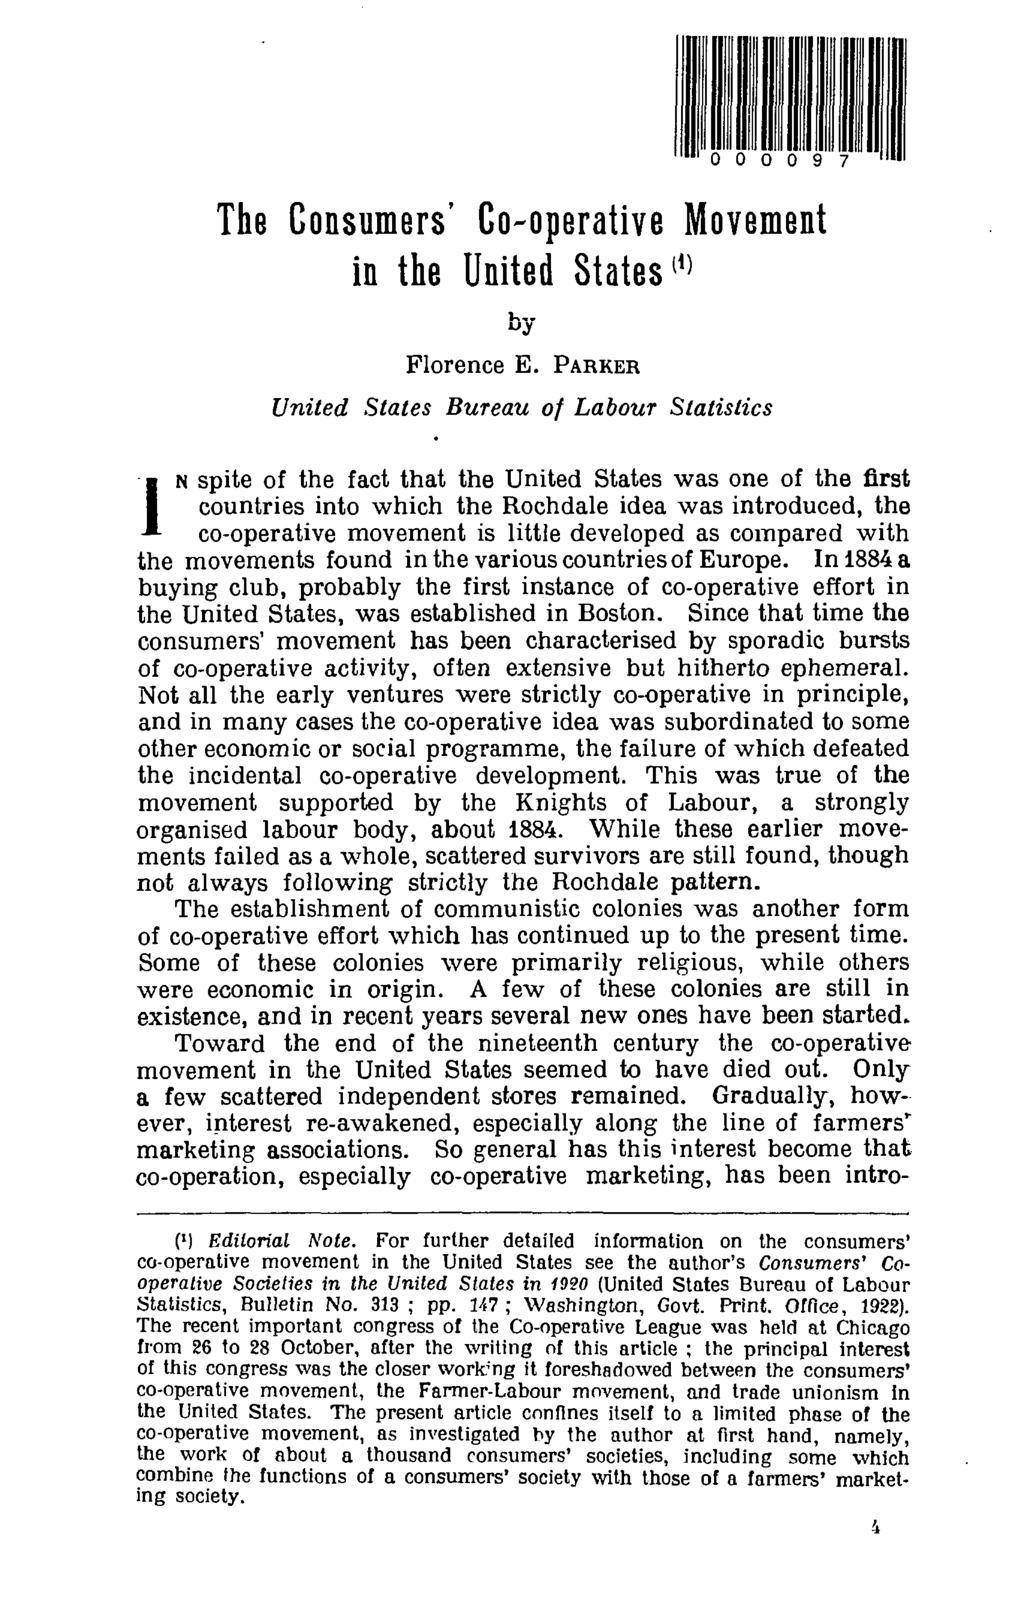 The Consumers' Co-operative Movement in the United States ll) Florence E.